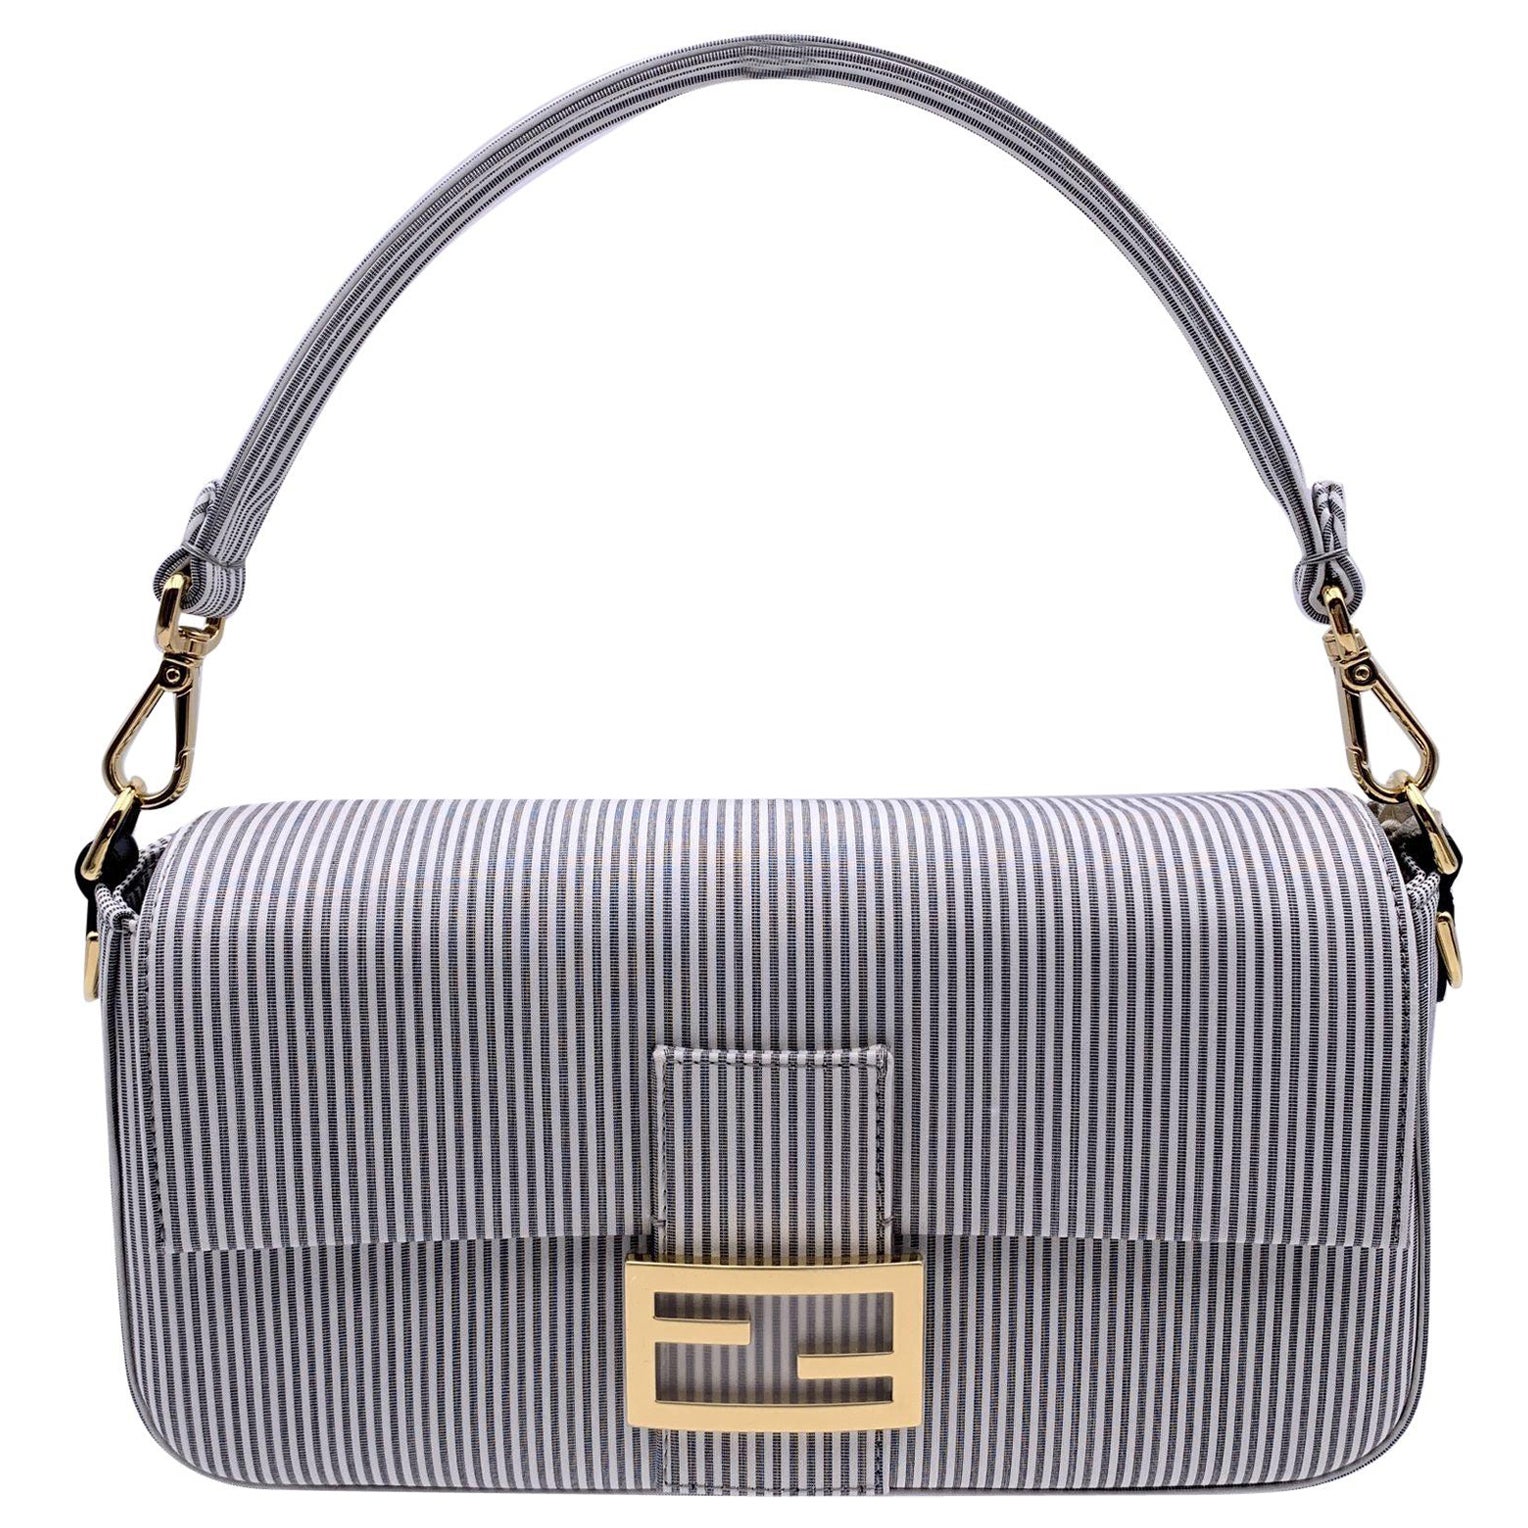 Does Fendi have their own factories?